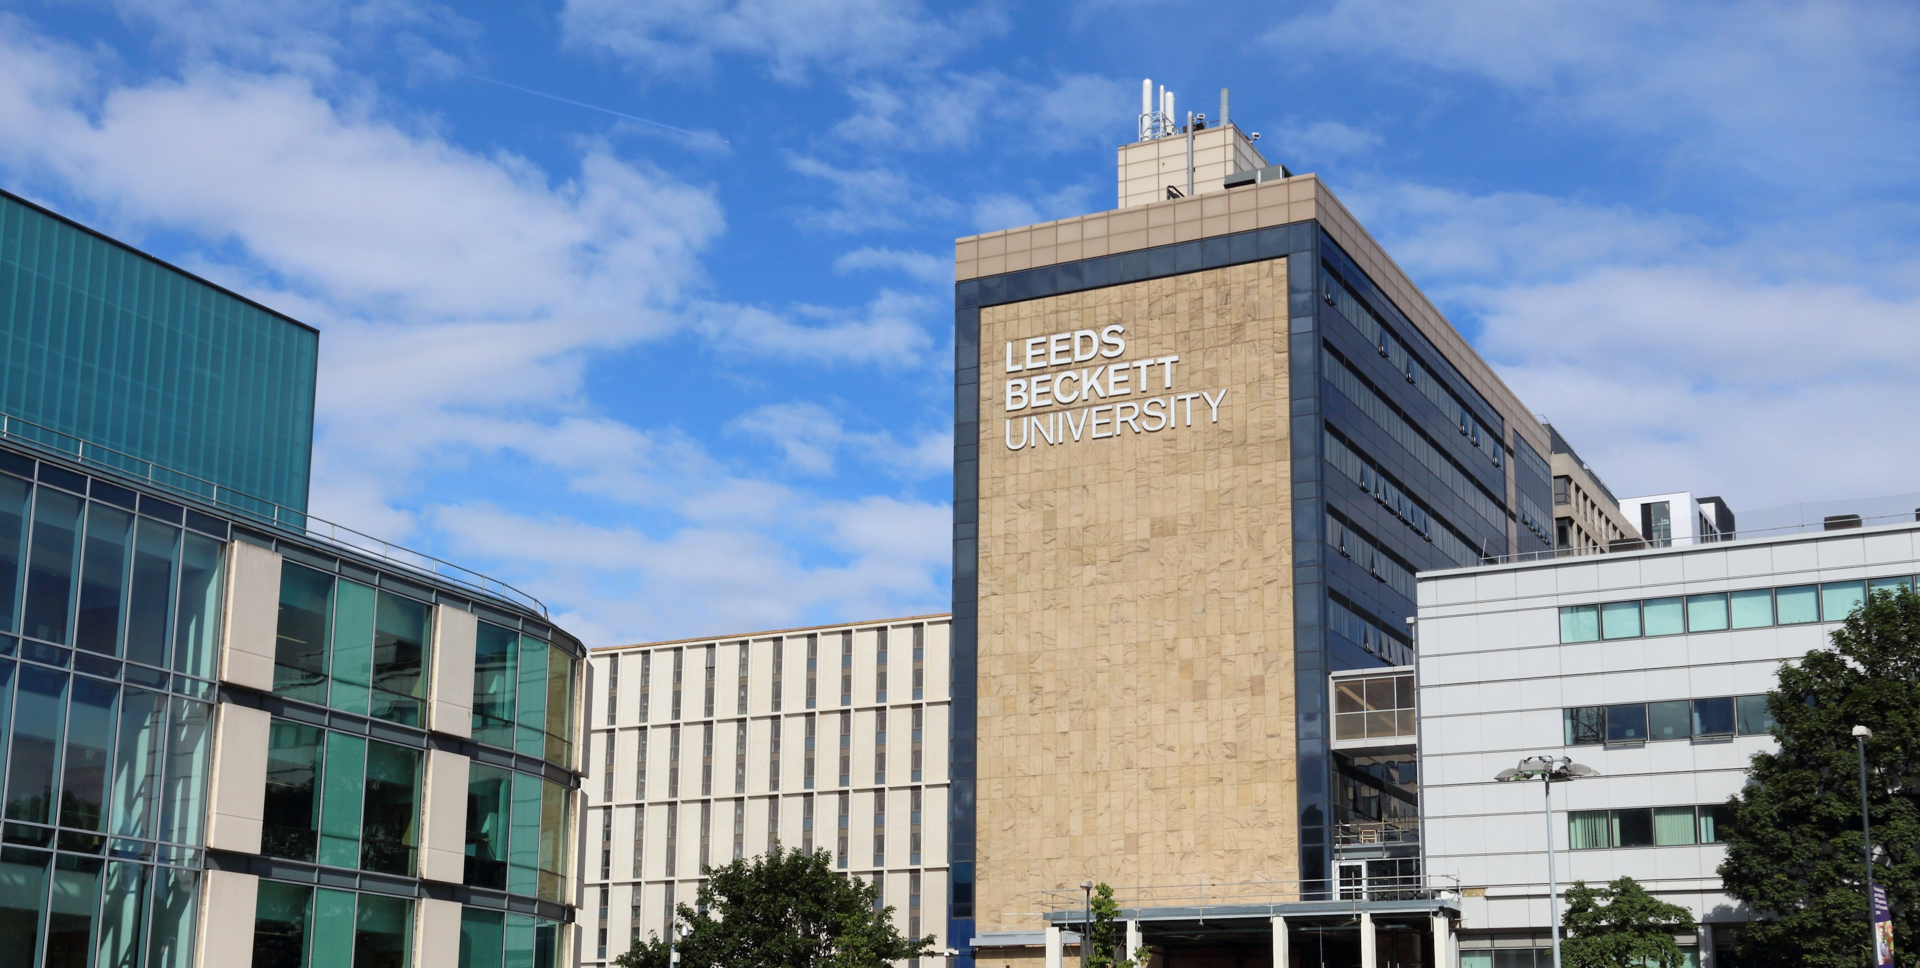 Leeds Beckett University embrace digital surveying as they prepare for expansion